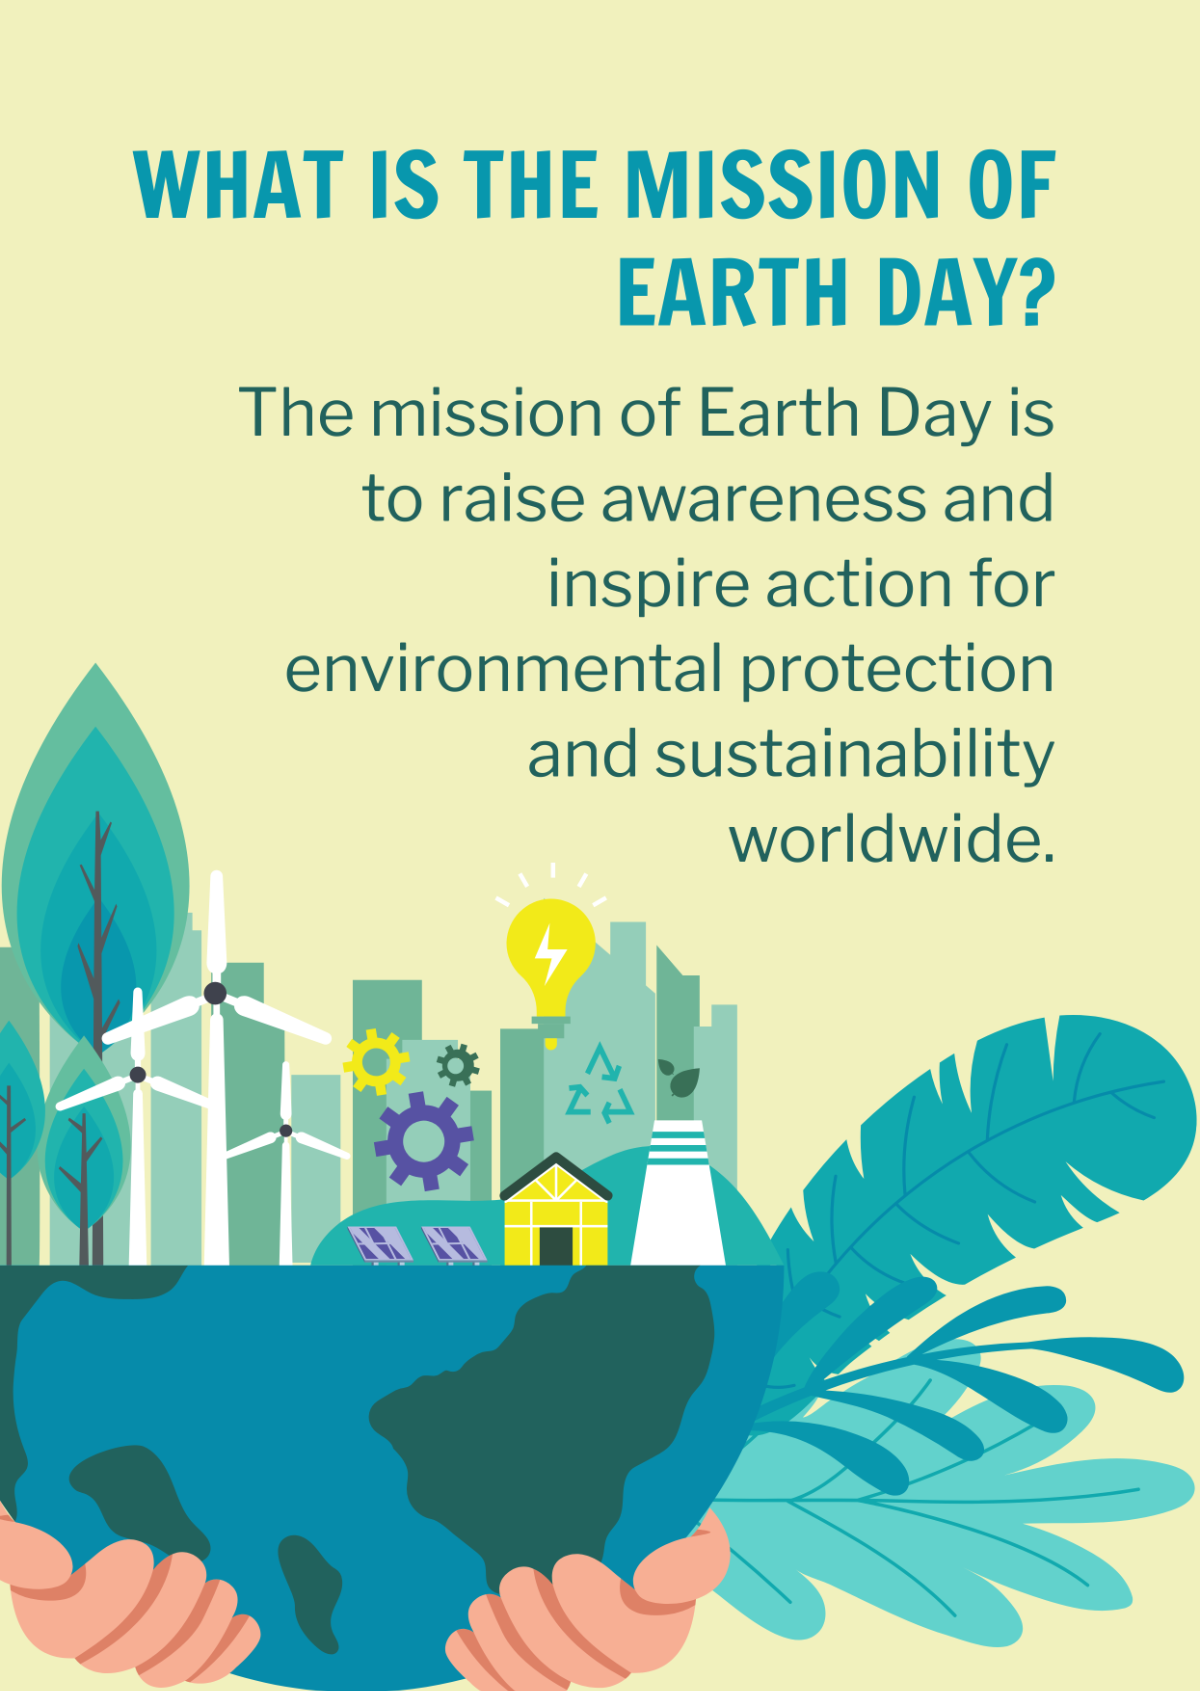 What is the mission of Earth Day?